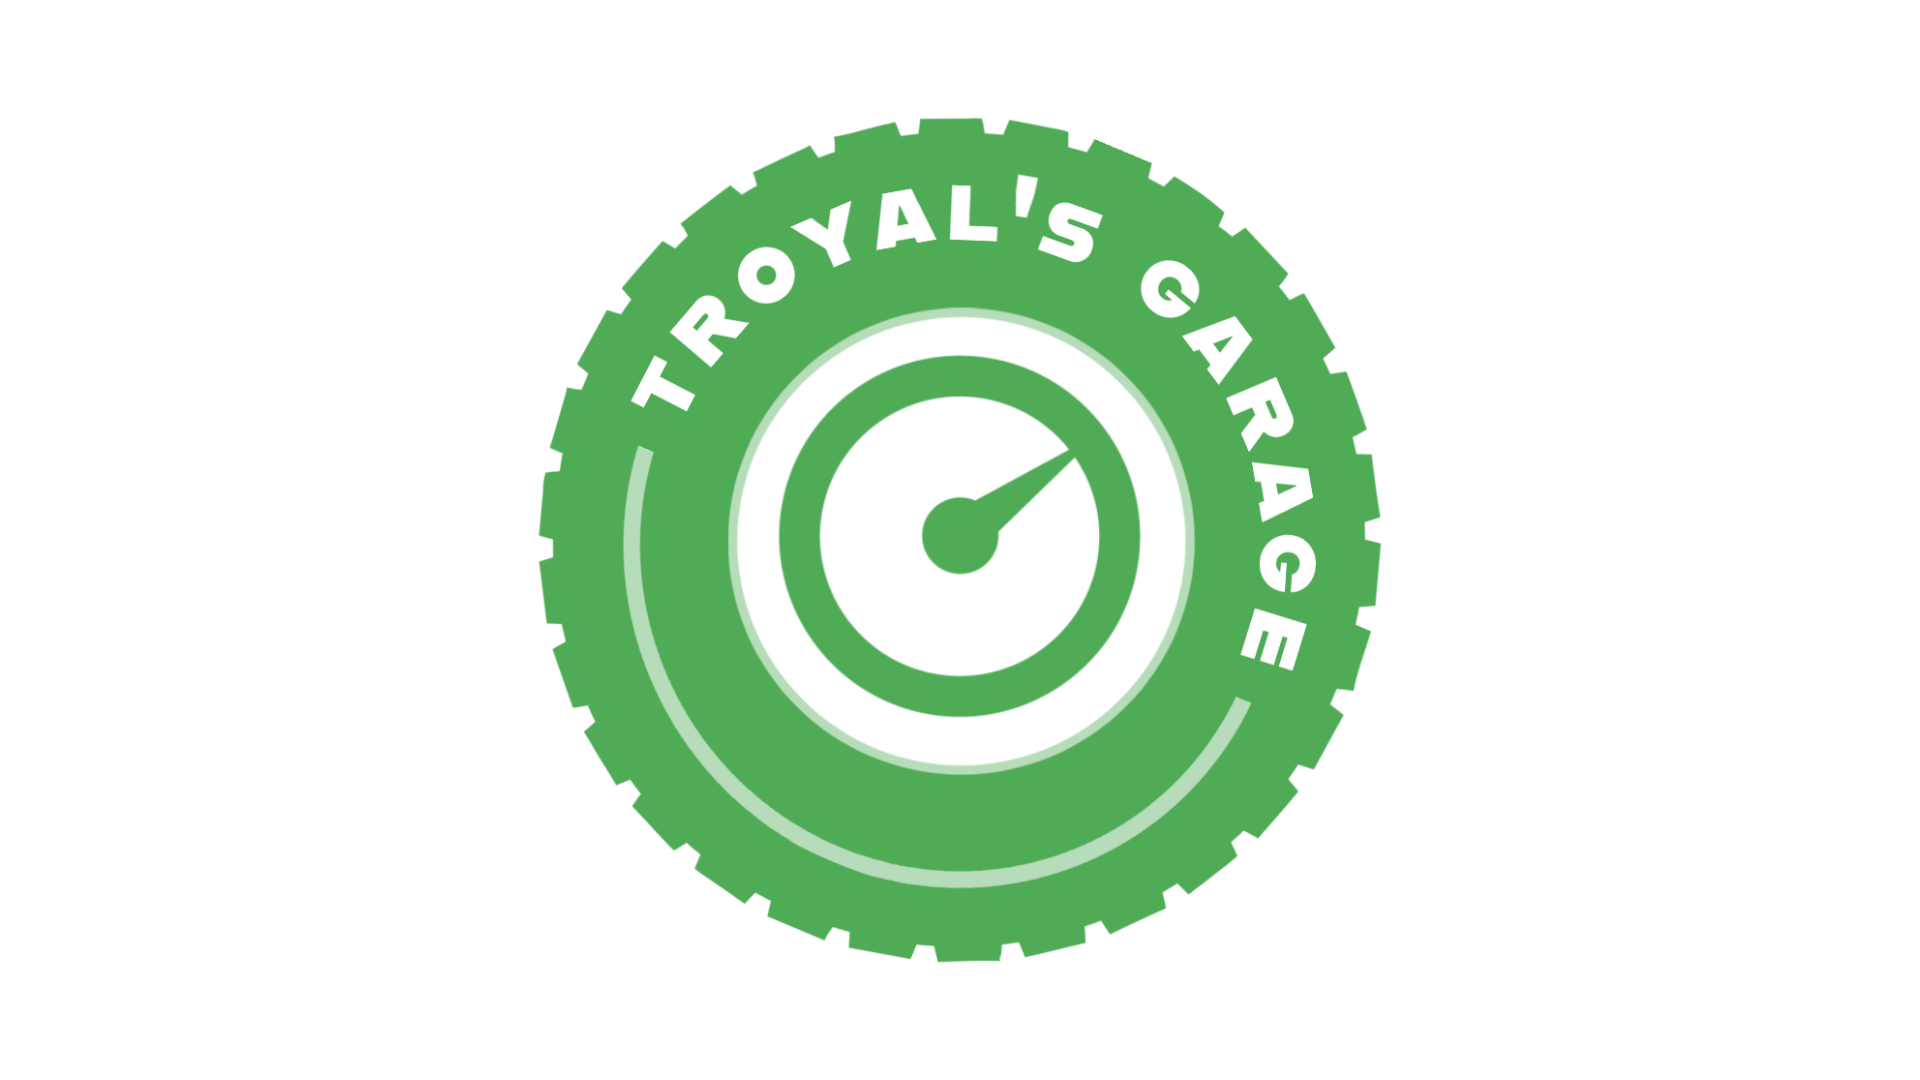 this week on Troyal's garage we're talking service records and keeping a clean car